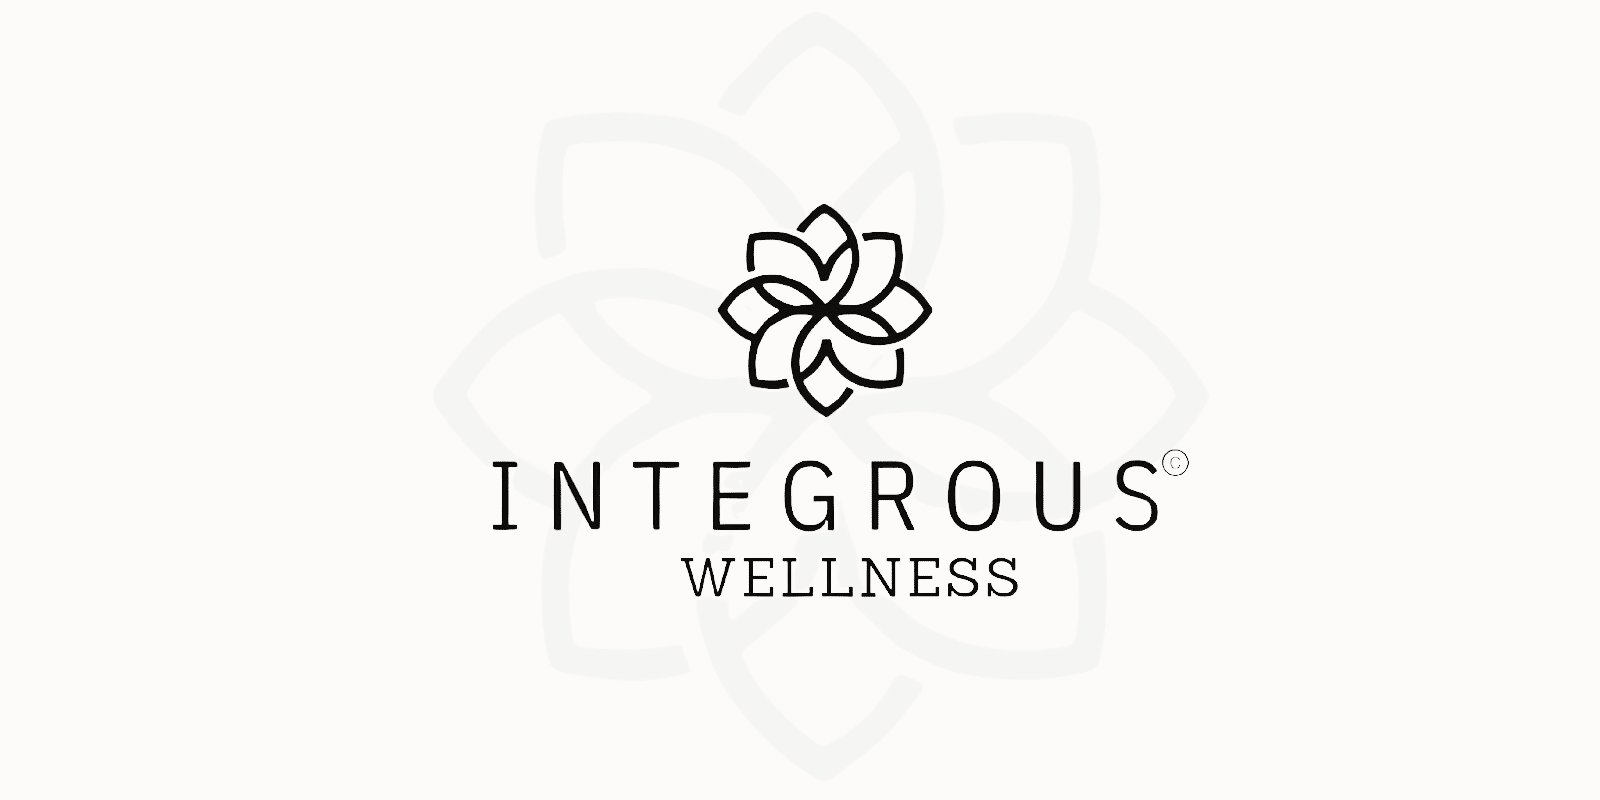 Integrous Wellness: Pioneering Ethical Practices in the World of Social Commerce